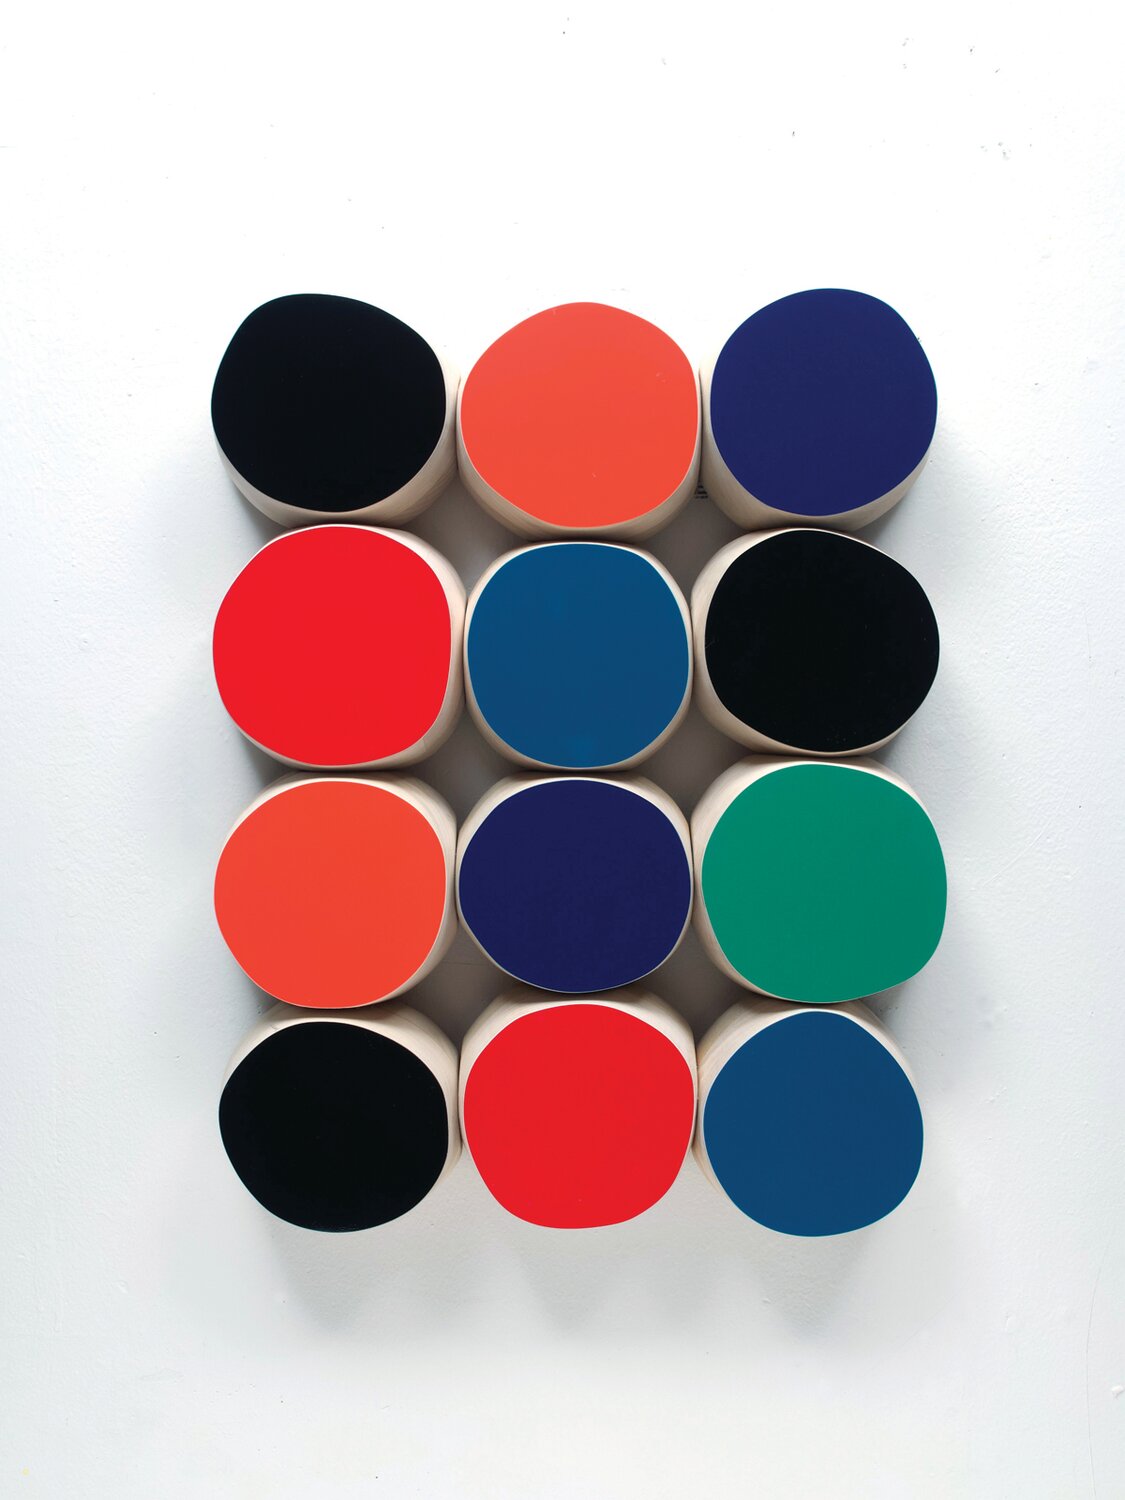 “Black, Orange, Blue, Red and Green” is automotive paint on wood by Andrew Zimmerman.